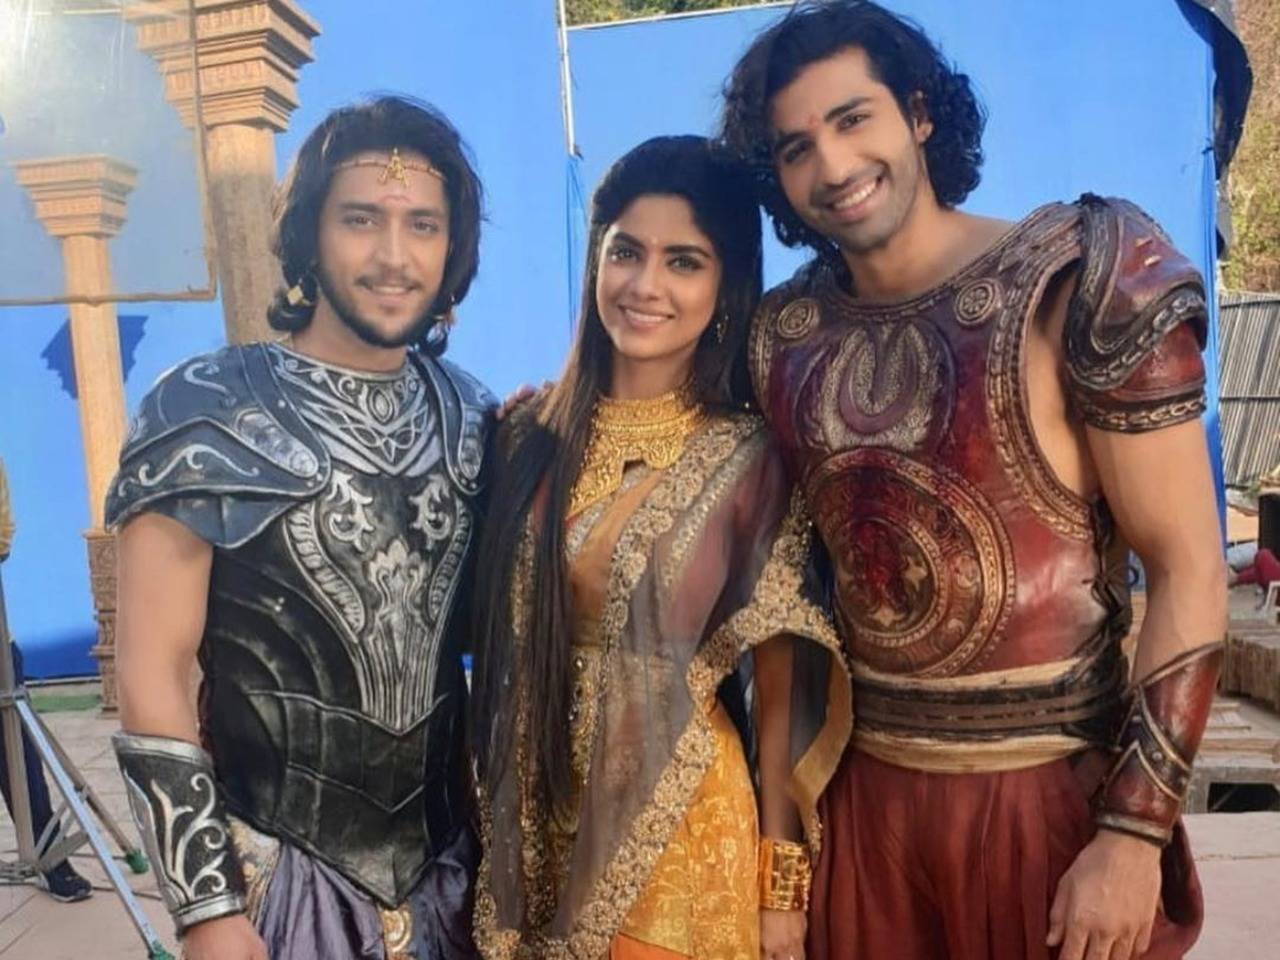 Karn Sangini actors bid adieu to their fans; see farewell pictures ...